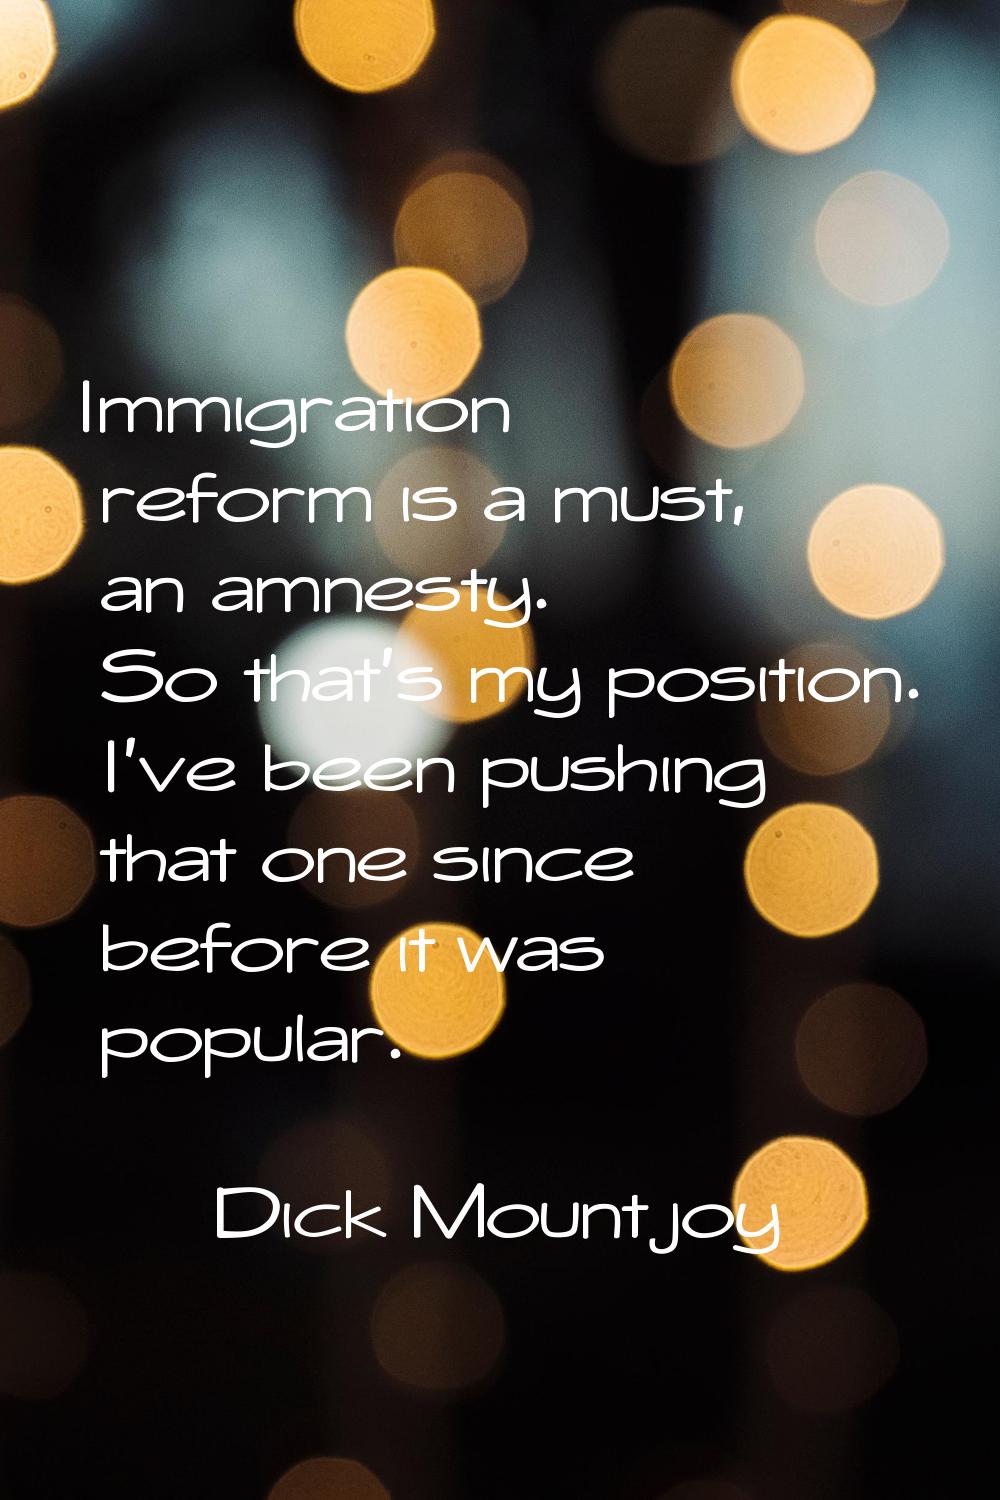 Immigration reform is a must, an amnesty. So that's my position. I've been pushing that one since b